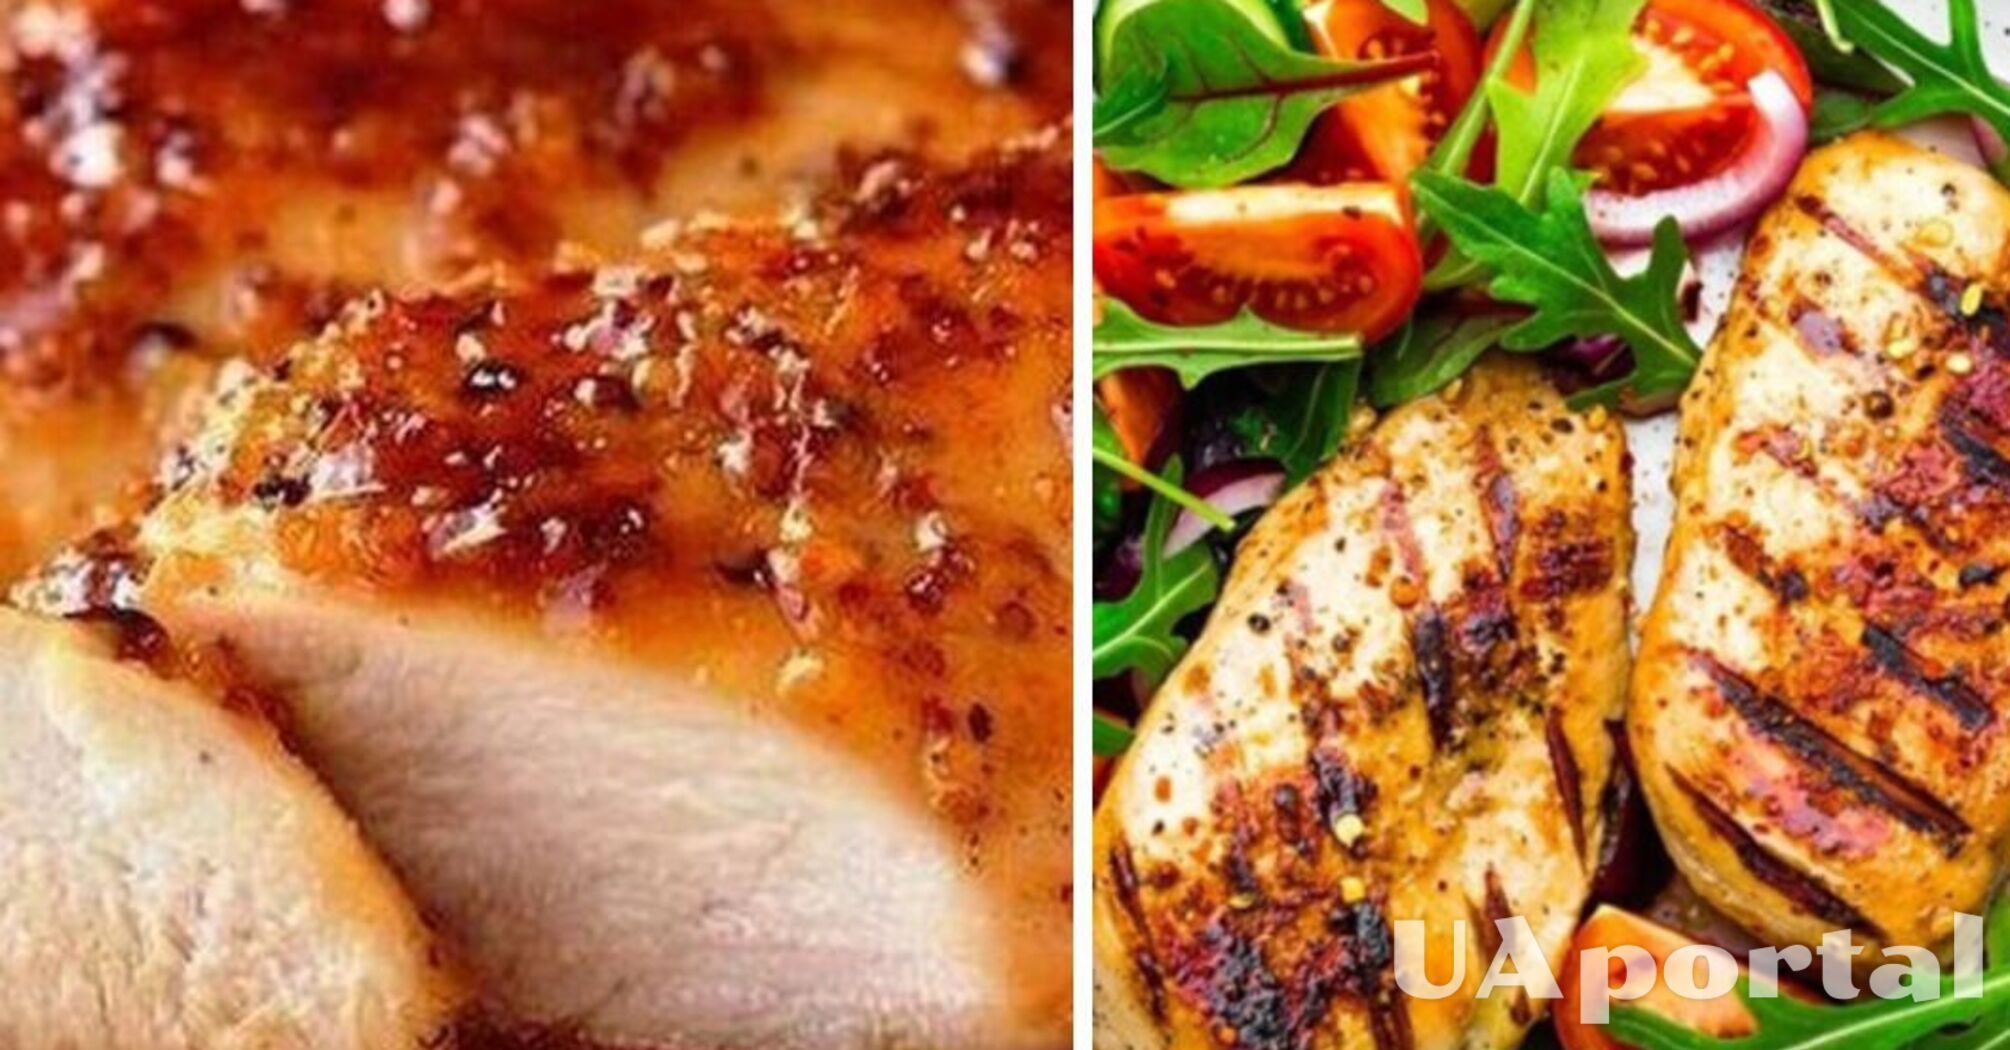 Incredibly juicy: how to cook chicken fillet correctly